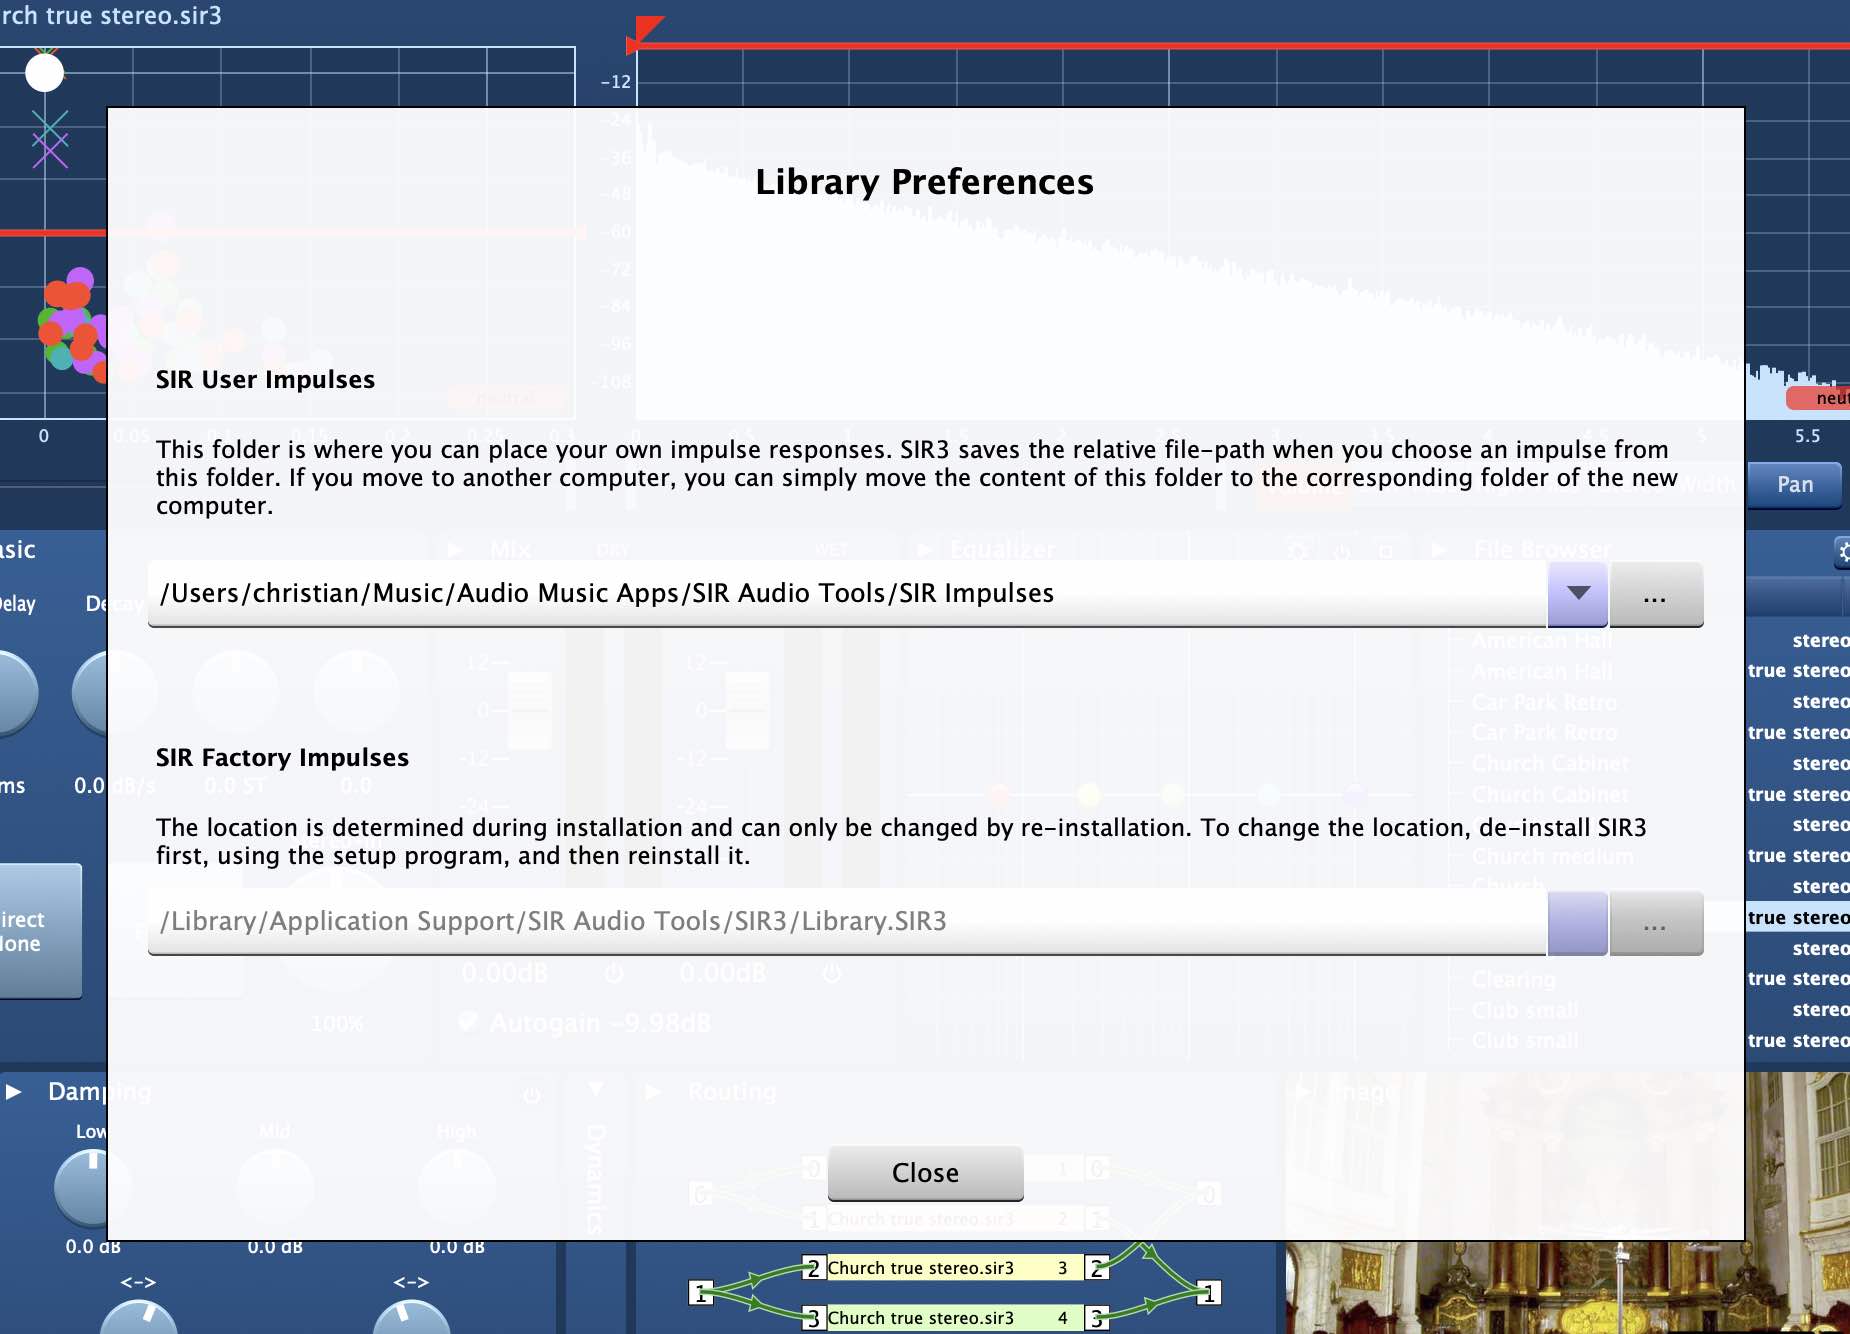 Library Preferences